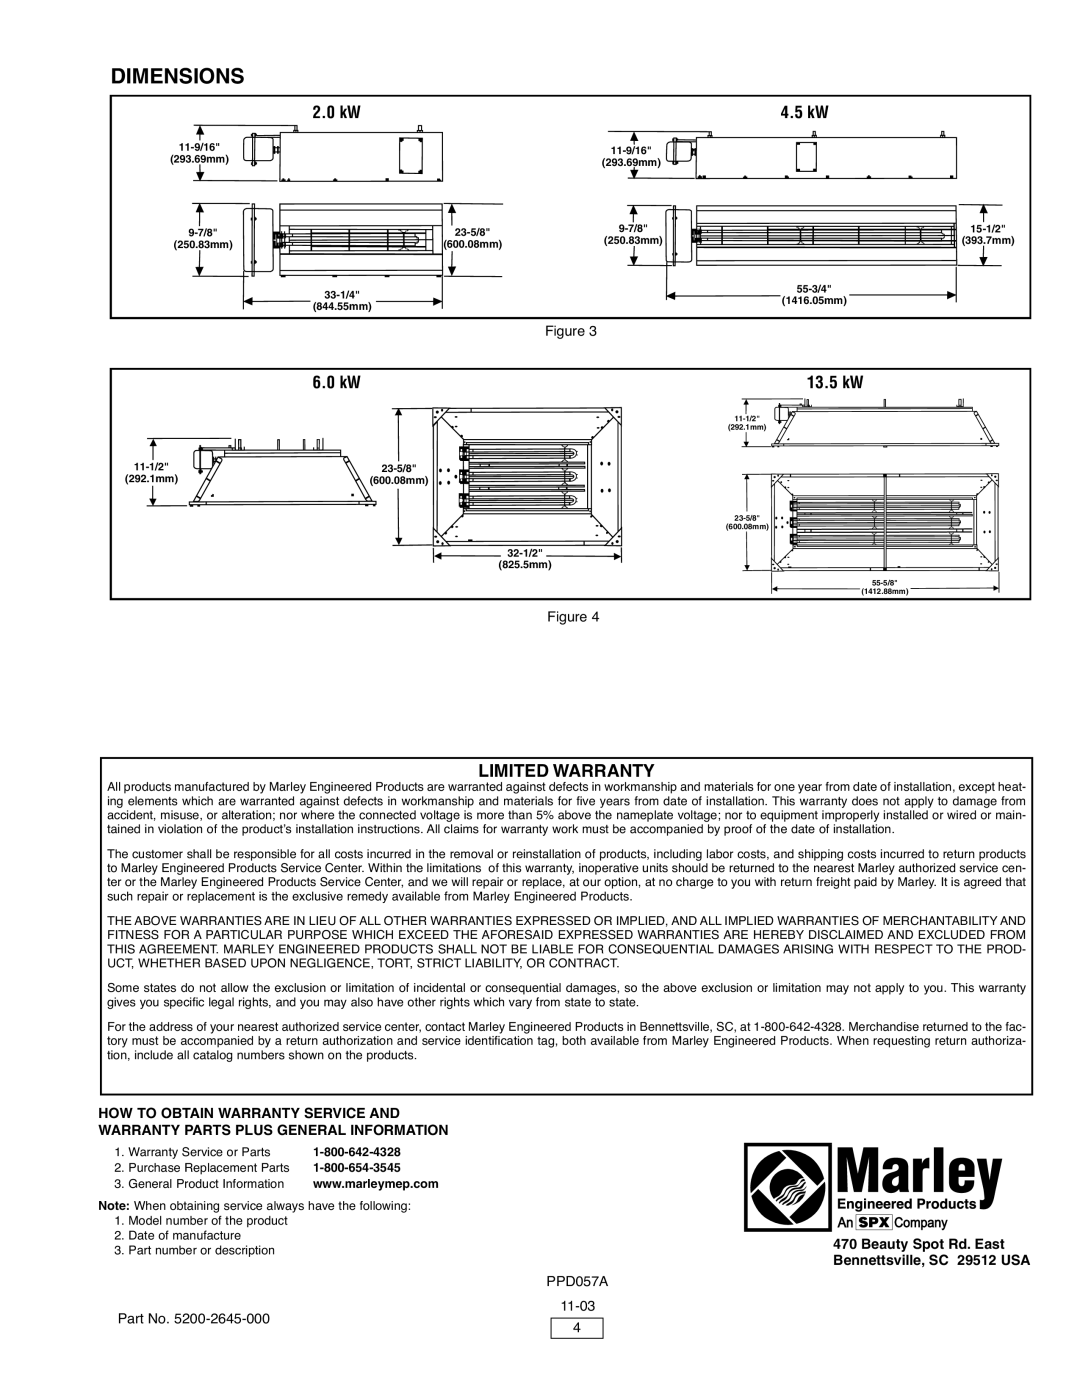 Marley Engineered Products M Series manual Dimensions, 2.0 kW, 4.5 kW, 6.0 kW, 13.5 kW, Limited Warranty 